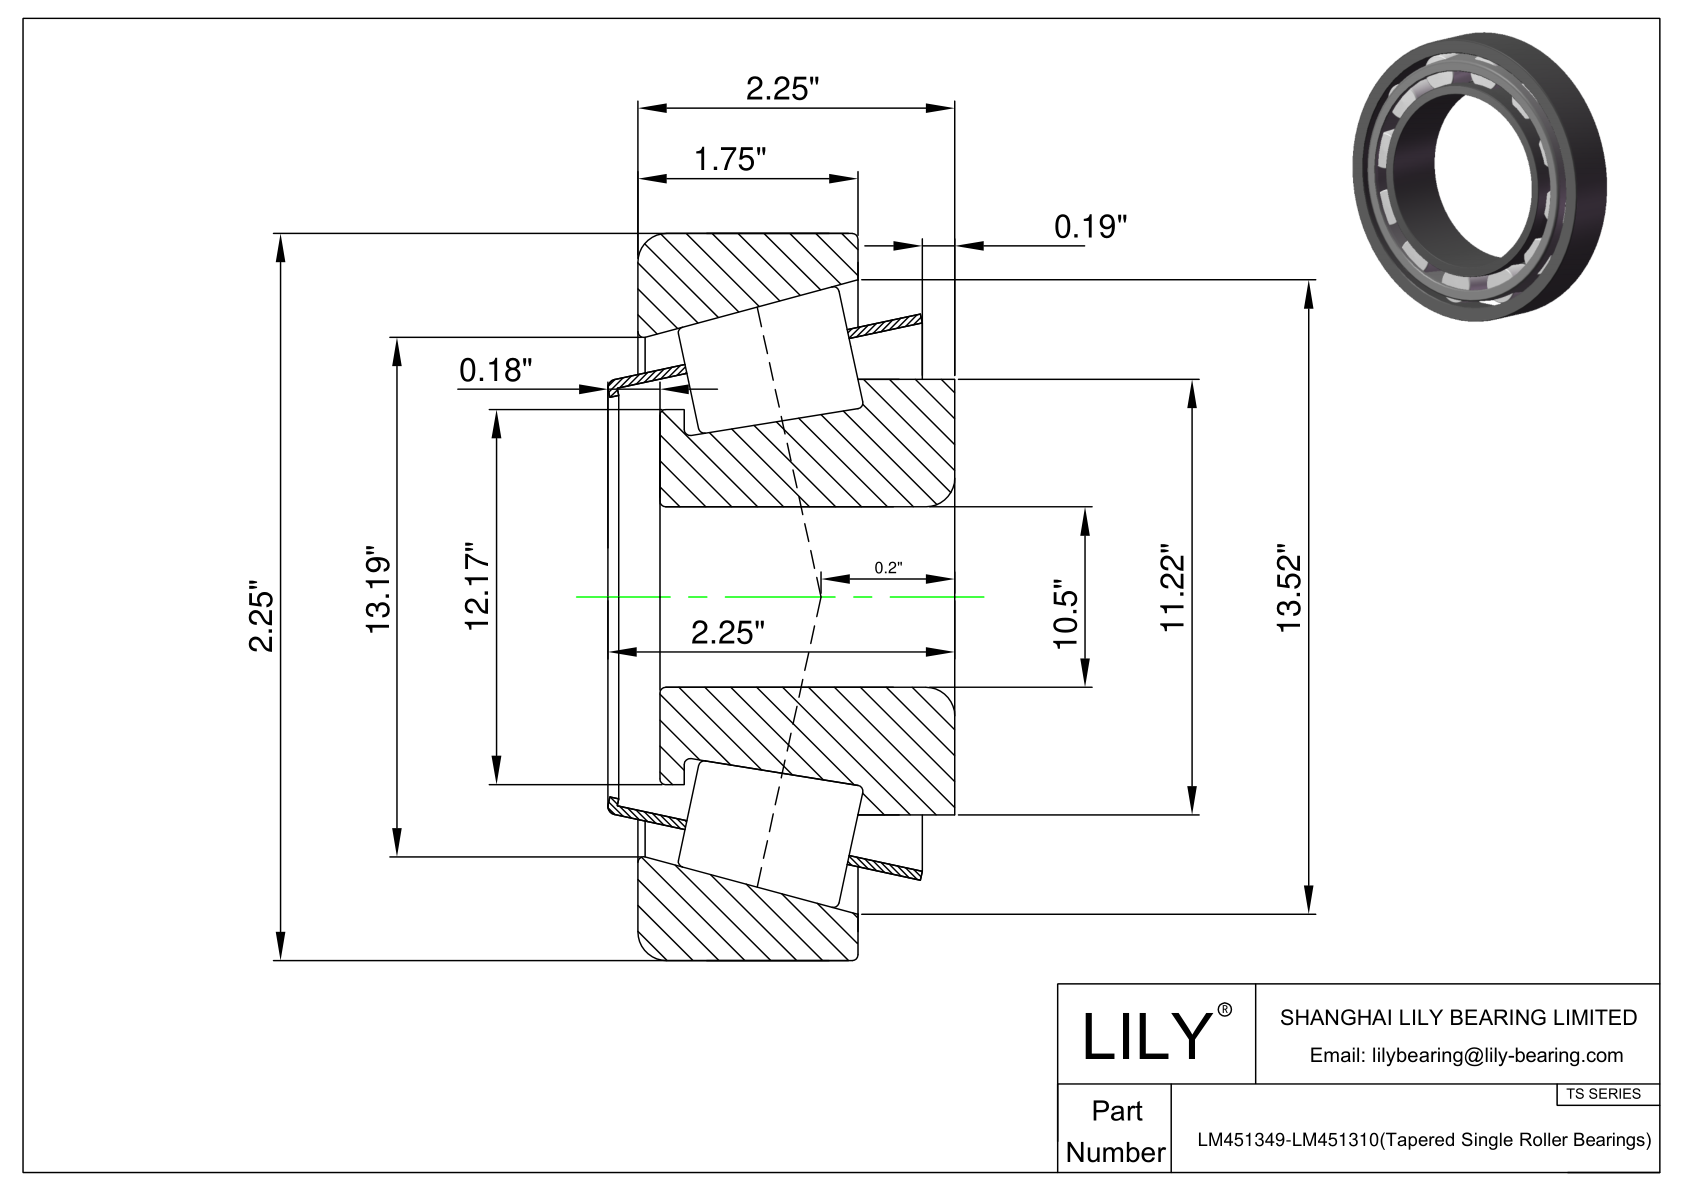 LM451349-LM451310 TS (Tapered Single Roller Bearings) (Imperial) cad drawing